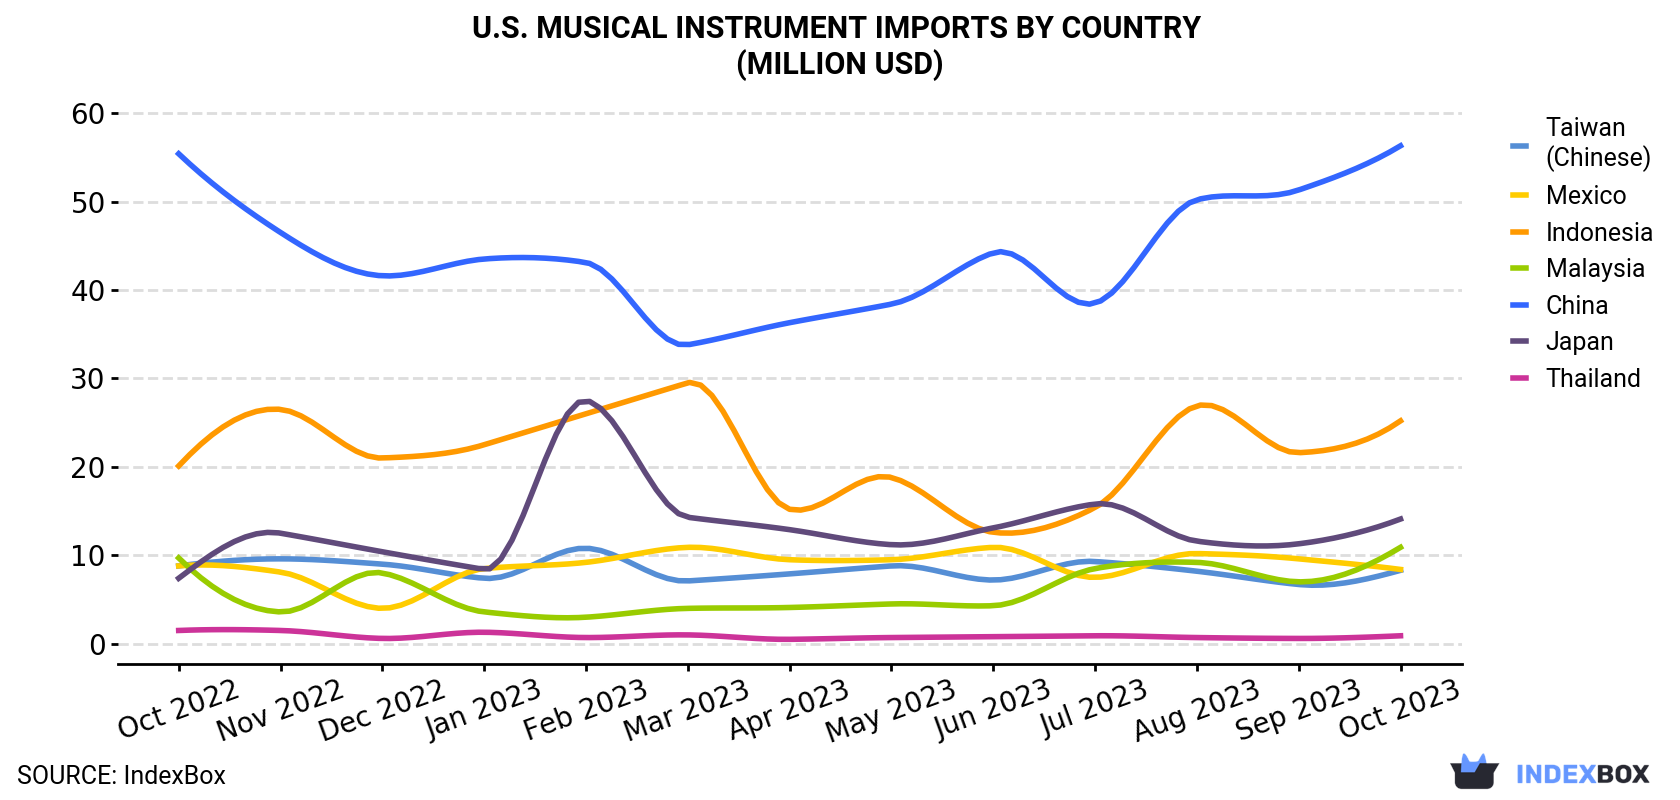 U.S. Musical Instrument Imports By Country (Million USD)